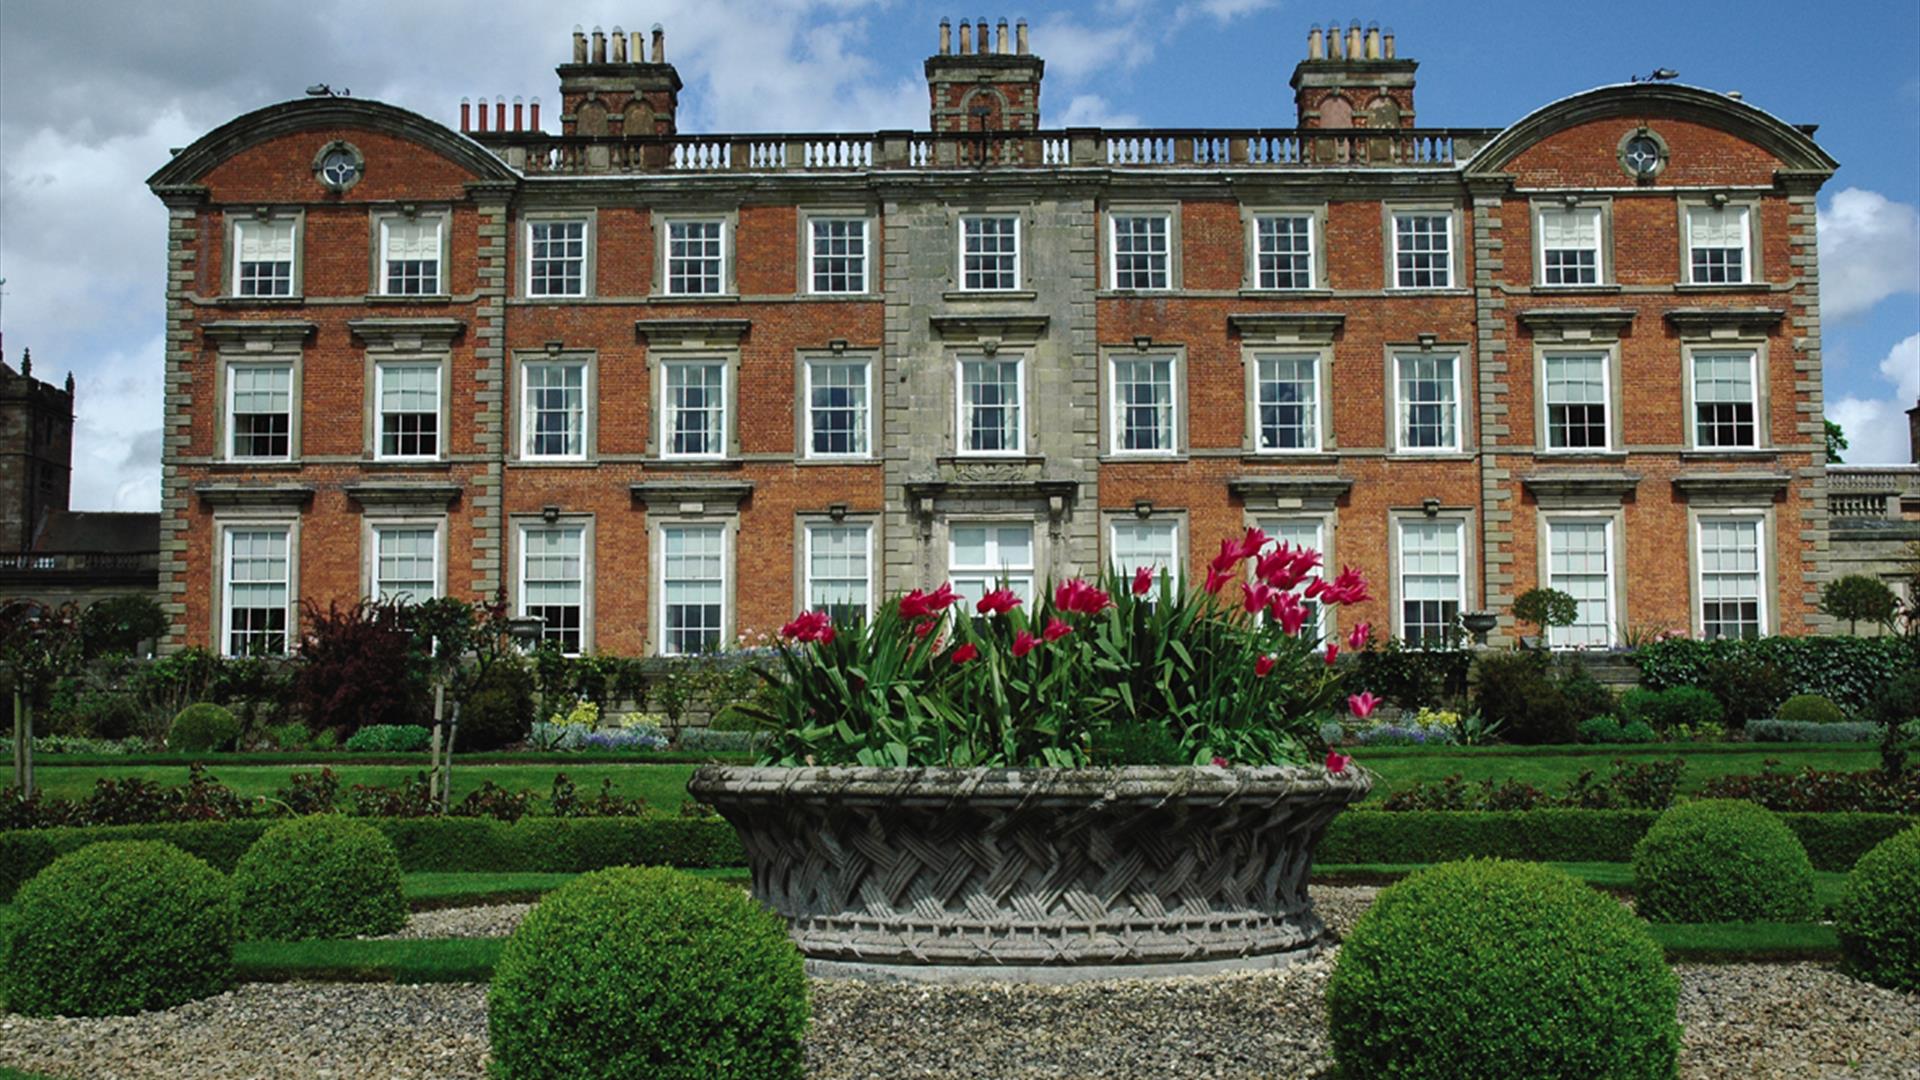 Discover the stately home of Weston Park